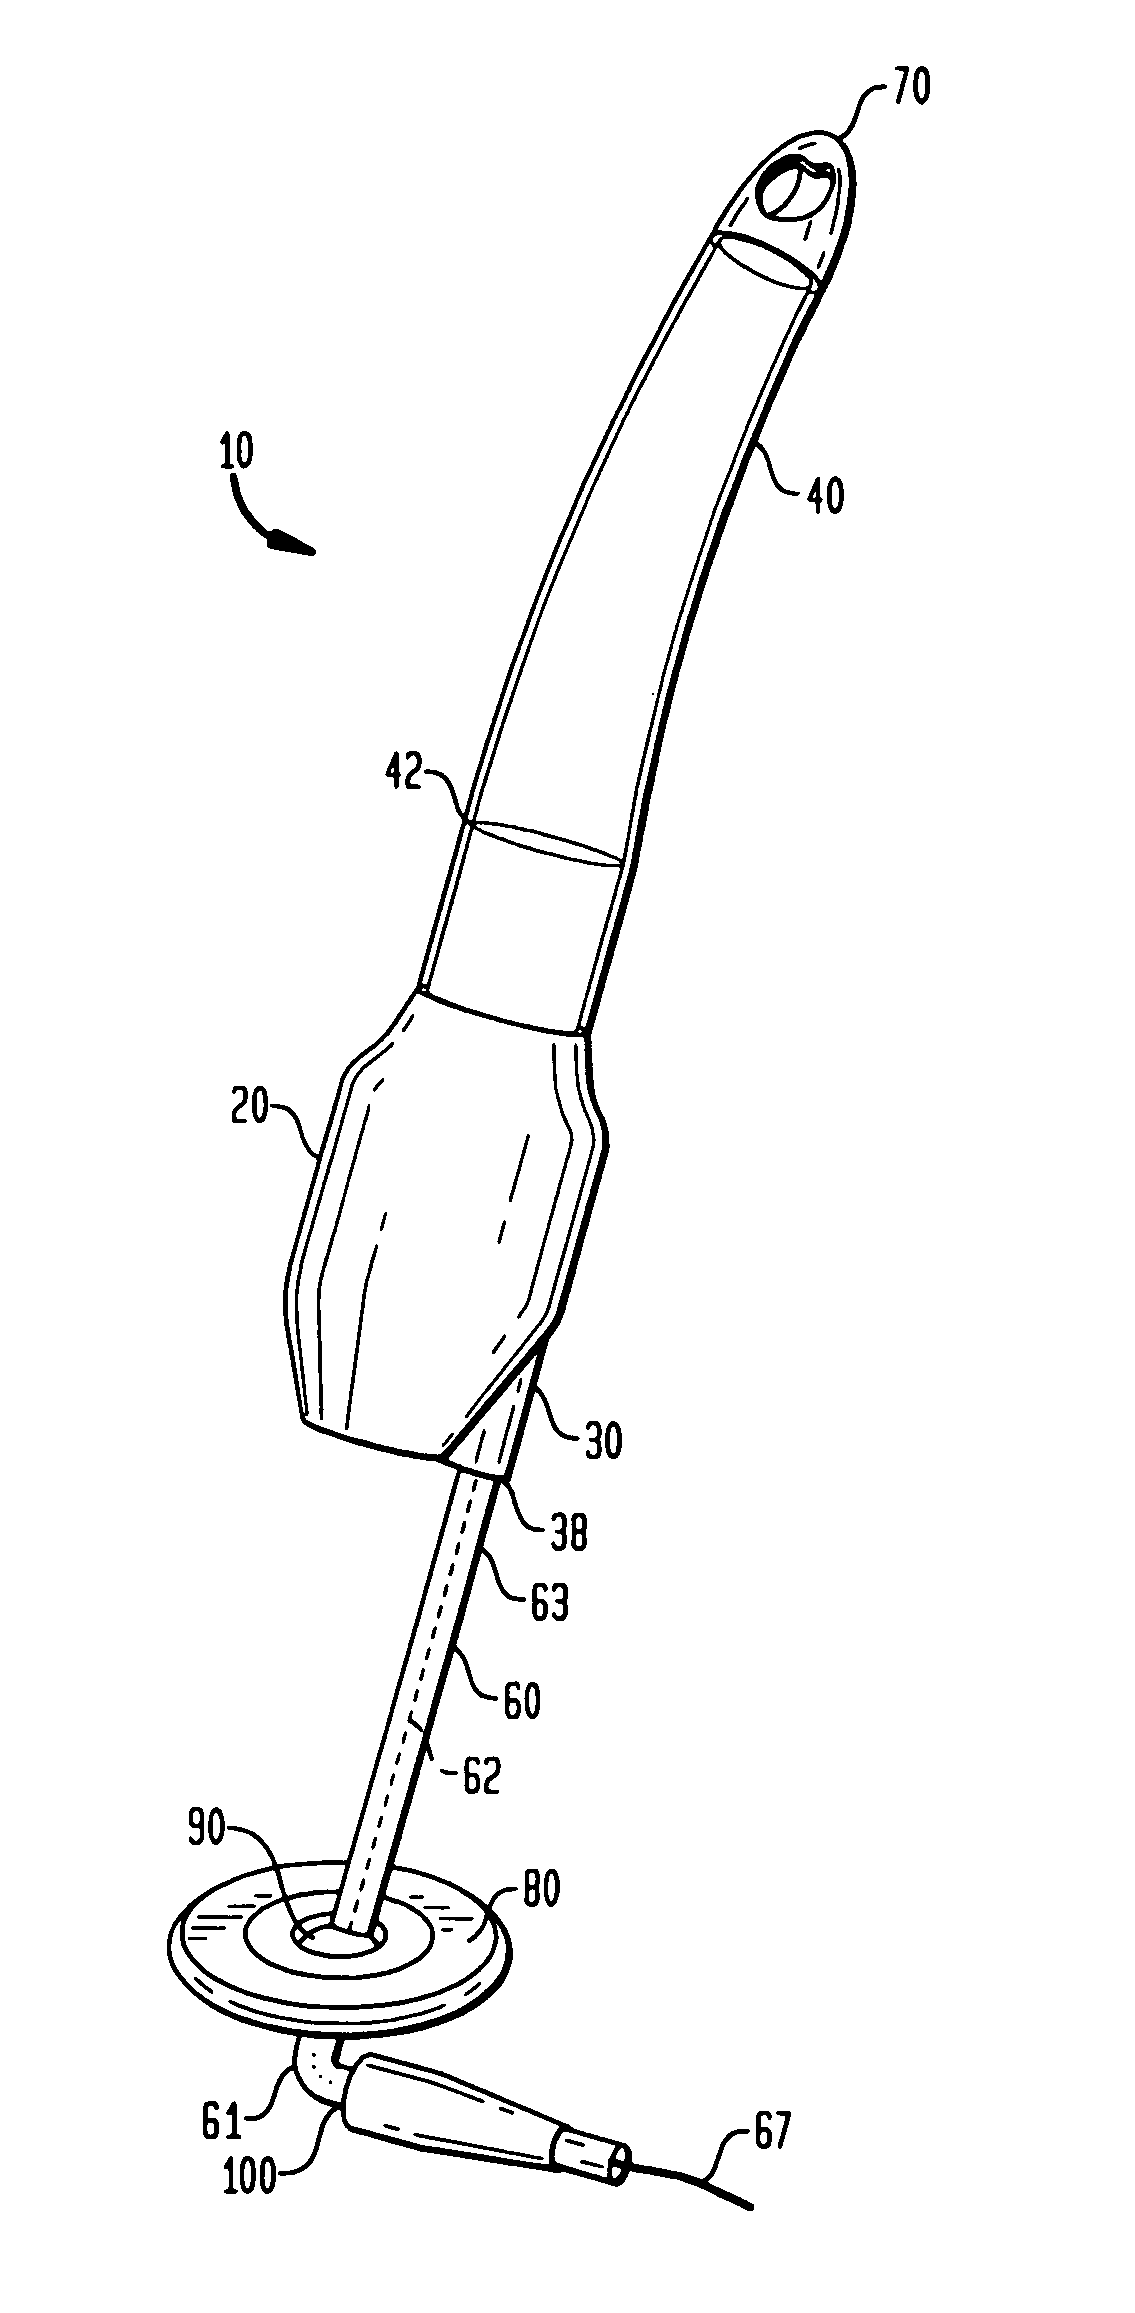 Ventricular assist device for intraventricular placement